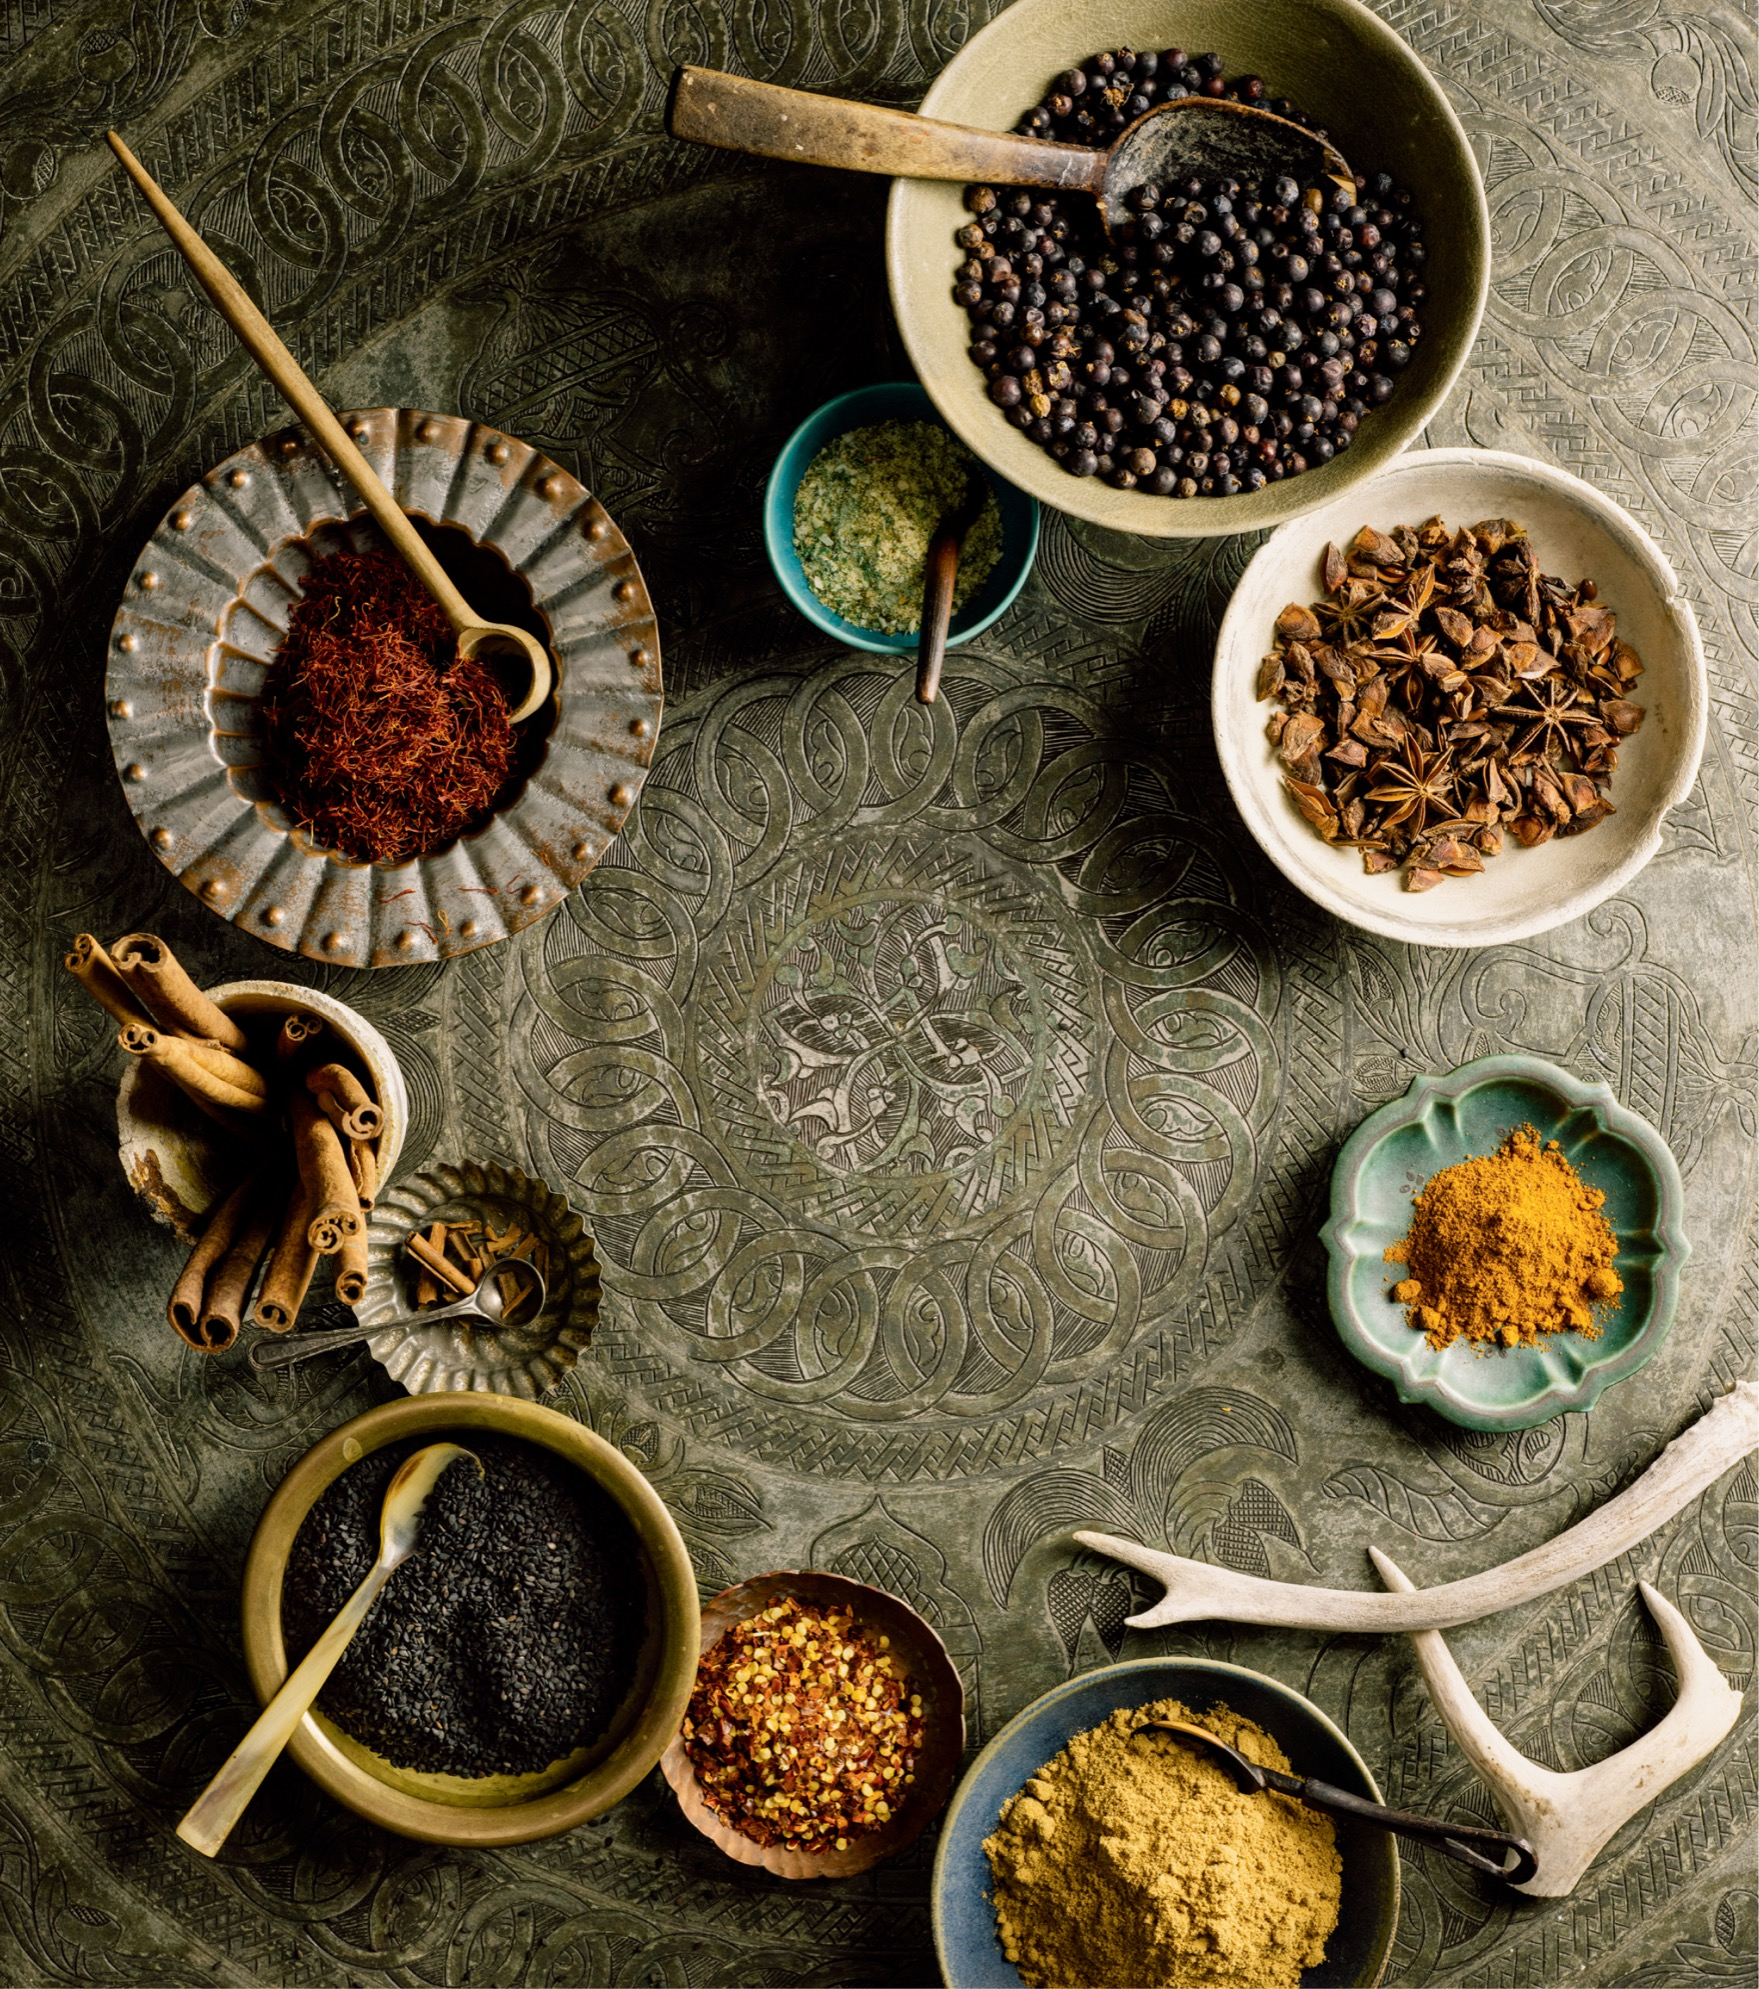 List of culinary herbs and spices - Wikipedia